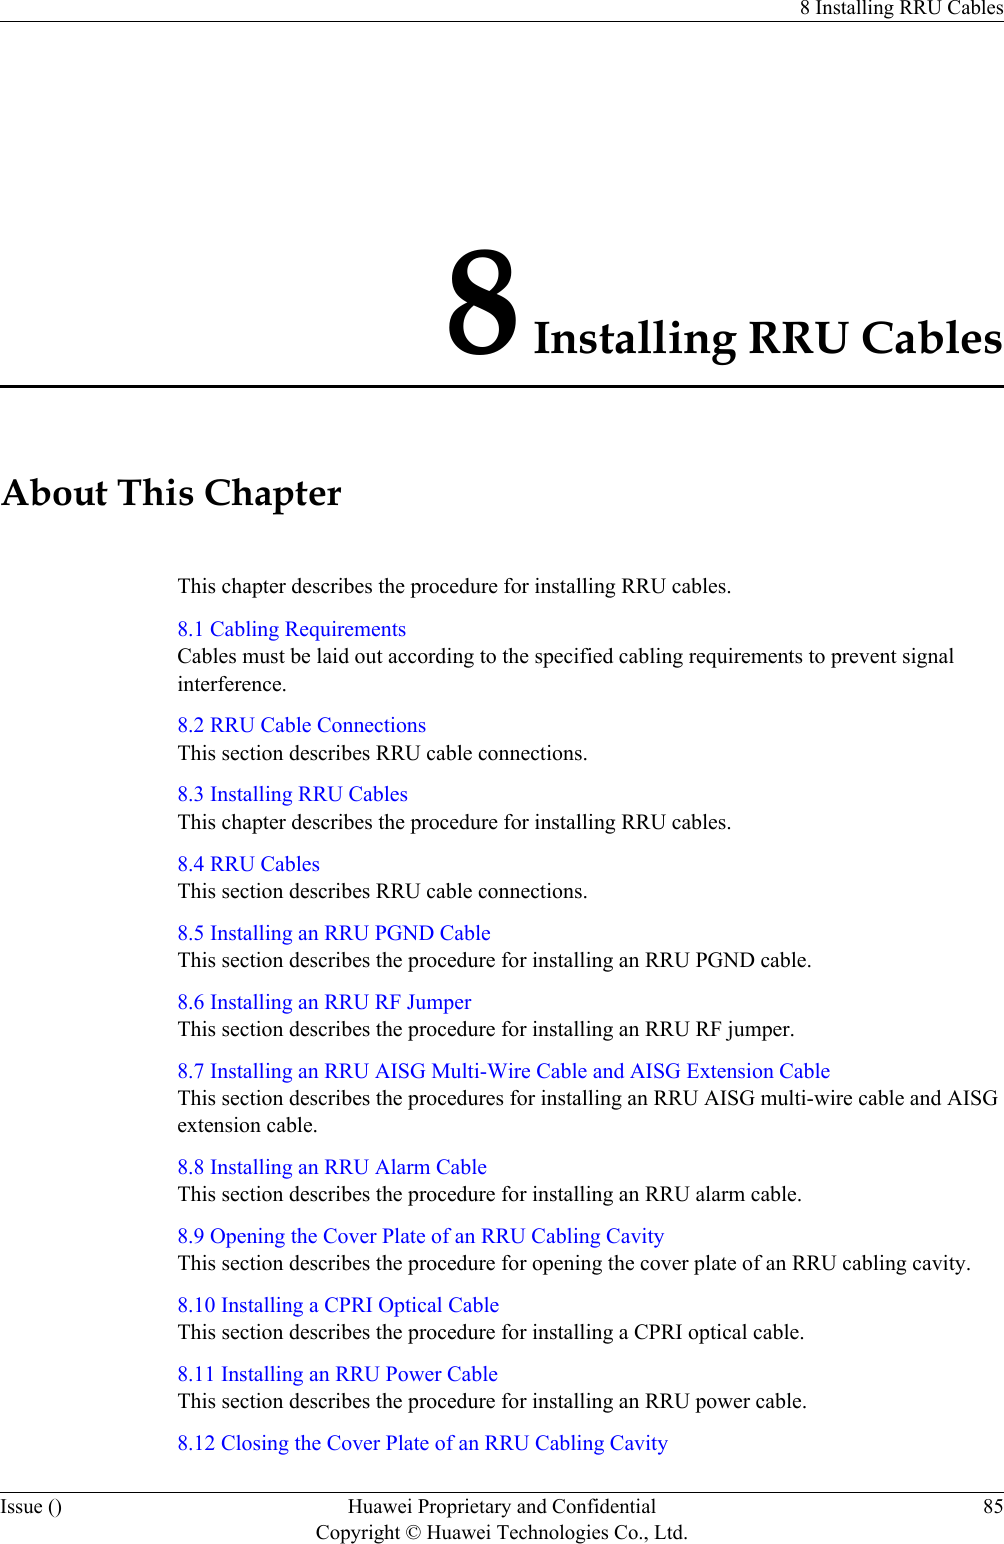 8 Installing RRU CablesAbout This ChapterThis chapter describes the procedure for installing RRU cables.8.1 Cabling RequirementsCables must be laid out according to the specified cabling requirements to prevent signalinterference.8.2 RRU Cable ConnectionsThis section describes RRU cable connections.8.3 Installing RRU CablesThis chapter describes the procedure for installing RRU cables.8.4 RRU CablesThis section describes RRU cable connections.8.5 Installing an RRU PGND CableThis section describes the procedure for installing an RRU PGND cable.8.6 Installing an RRU RF JumperThis section describes the procedure for installing an RRU RF jumper.8.7 Installing an RRU AISG Multi-Wire Cable and AISG Extension CableThis section describes the procedures for installing an RRU AISG multi-wire cable and AISGextension cable.8.8 Installing an RRU Alarm CableThis section describes the procedure for installing an RRU alarm cable.8.9 Opening the Cover Plate of an RRU Cabling CavityThis section describes the procedure for opening the cover plate of an RRU cabling cavity.8.10 Installing a CPRI Optical CableThis section describes the procedure for installing a CPRI optical cable.8.11 Installing an RRU Power CableThis section describes the procedure for installing an RRU power cable.8.12 Closing the Cover Plate of an RRU Cabling Cavity8 Installing RRU CablesIssue () Huawei Proprietary and ConfidentialCopyright © Huawei Technologies Co., Ltd.85